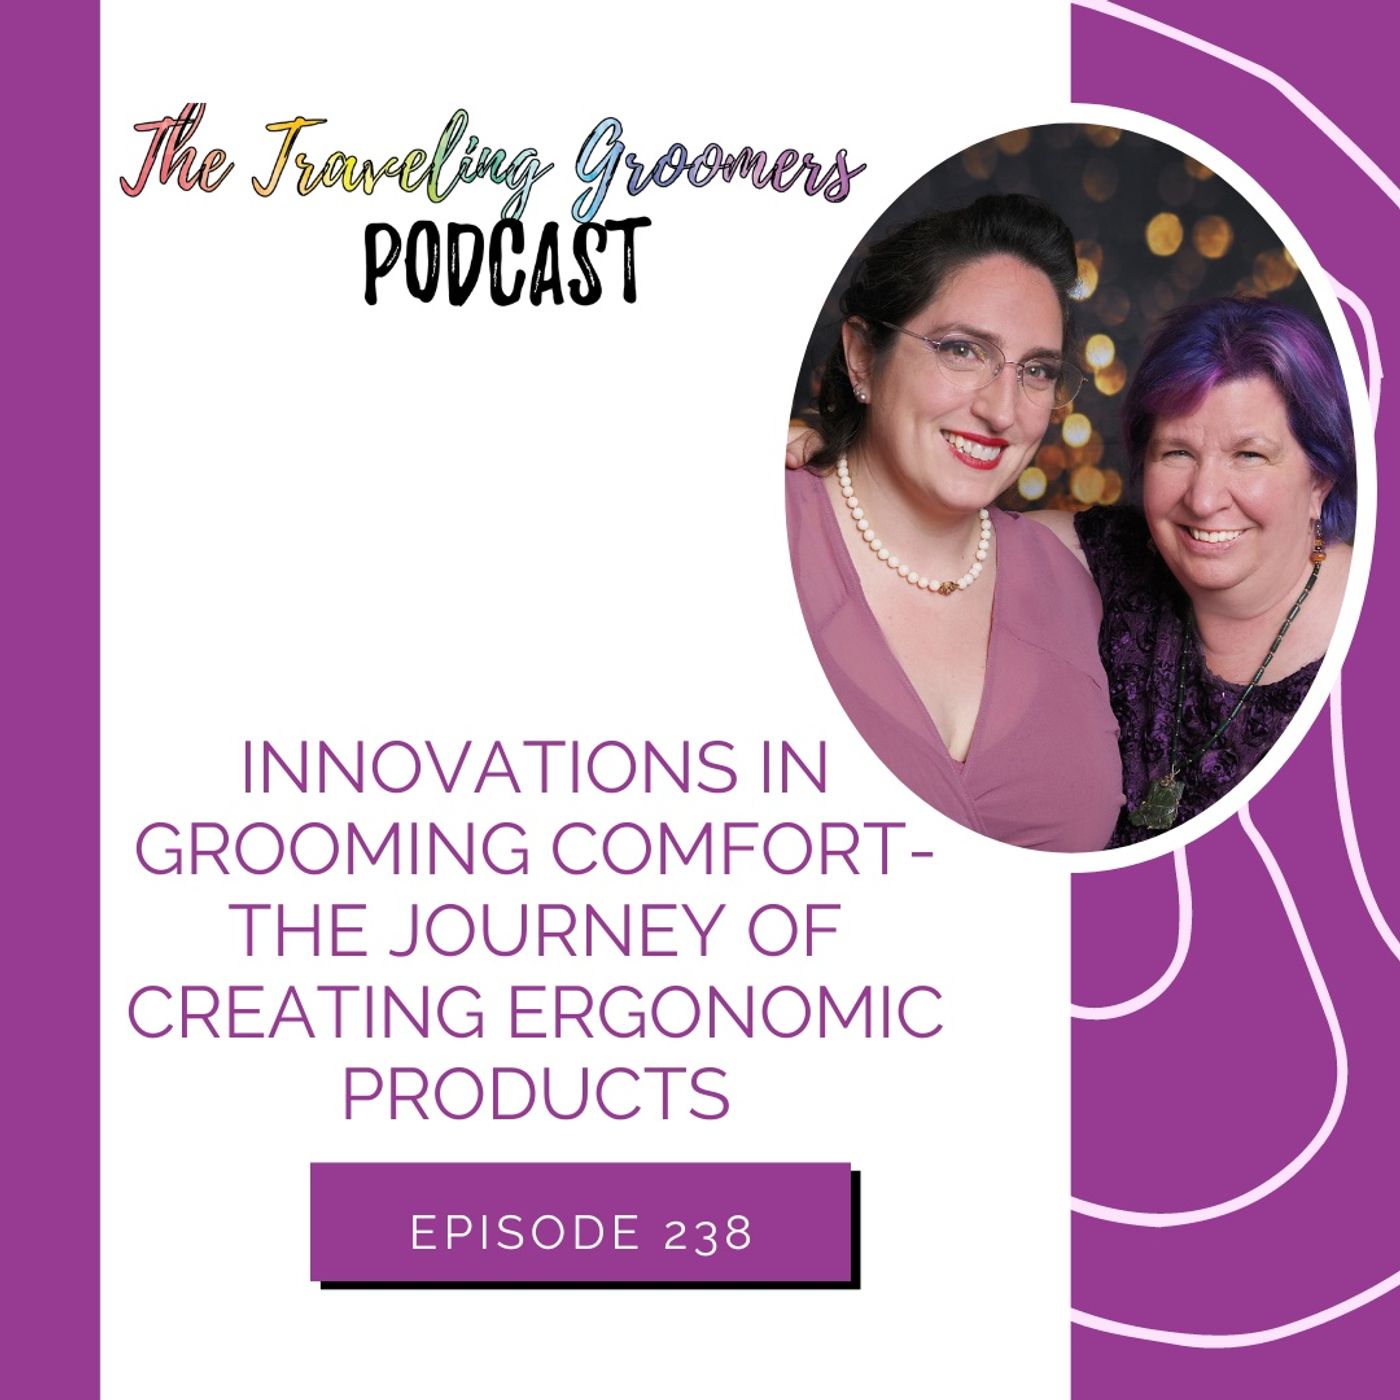 Innovations in Grooming Comfort The Journey of Creating Ergonomic Products